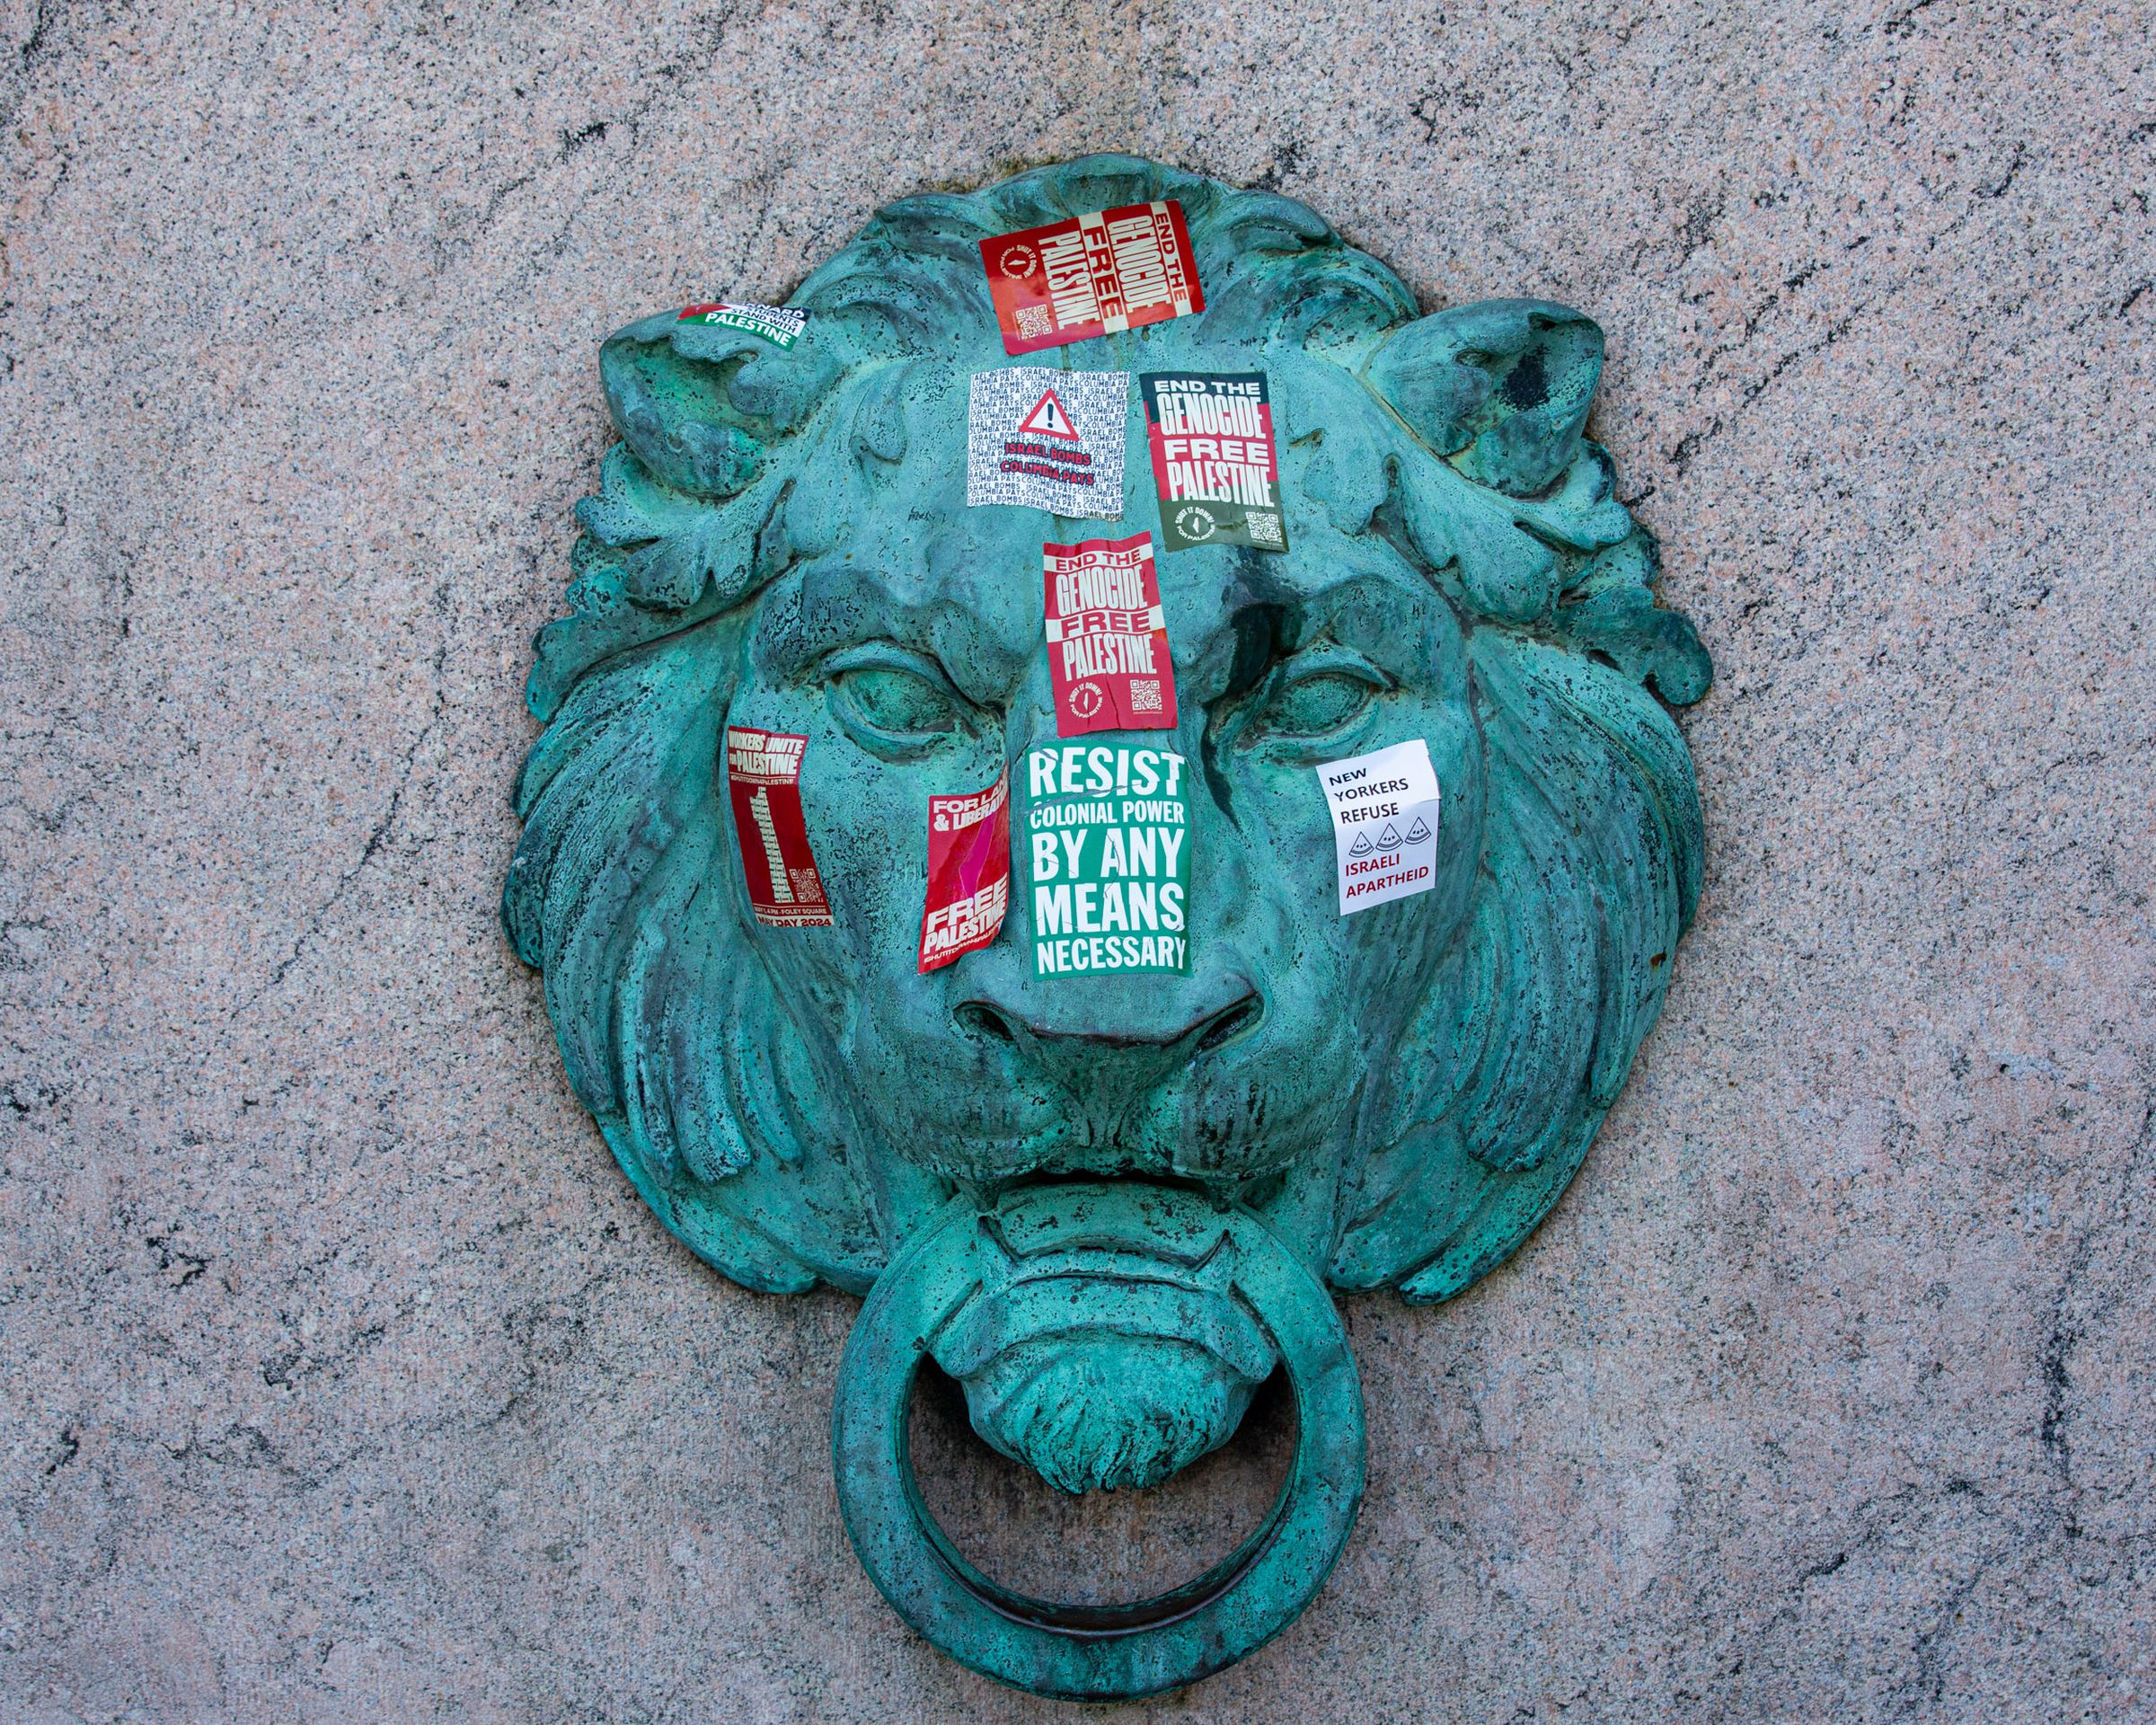 A photo of a patinaed bronze lion head affixed to marble. The lion head is covered in political stickers, including slogans like “End the Genocide, Free Palestine.”